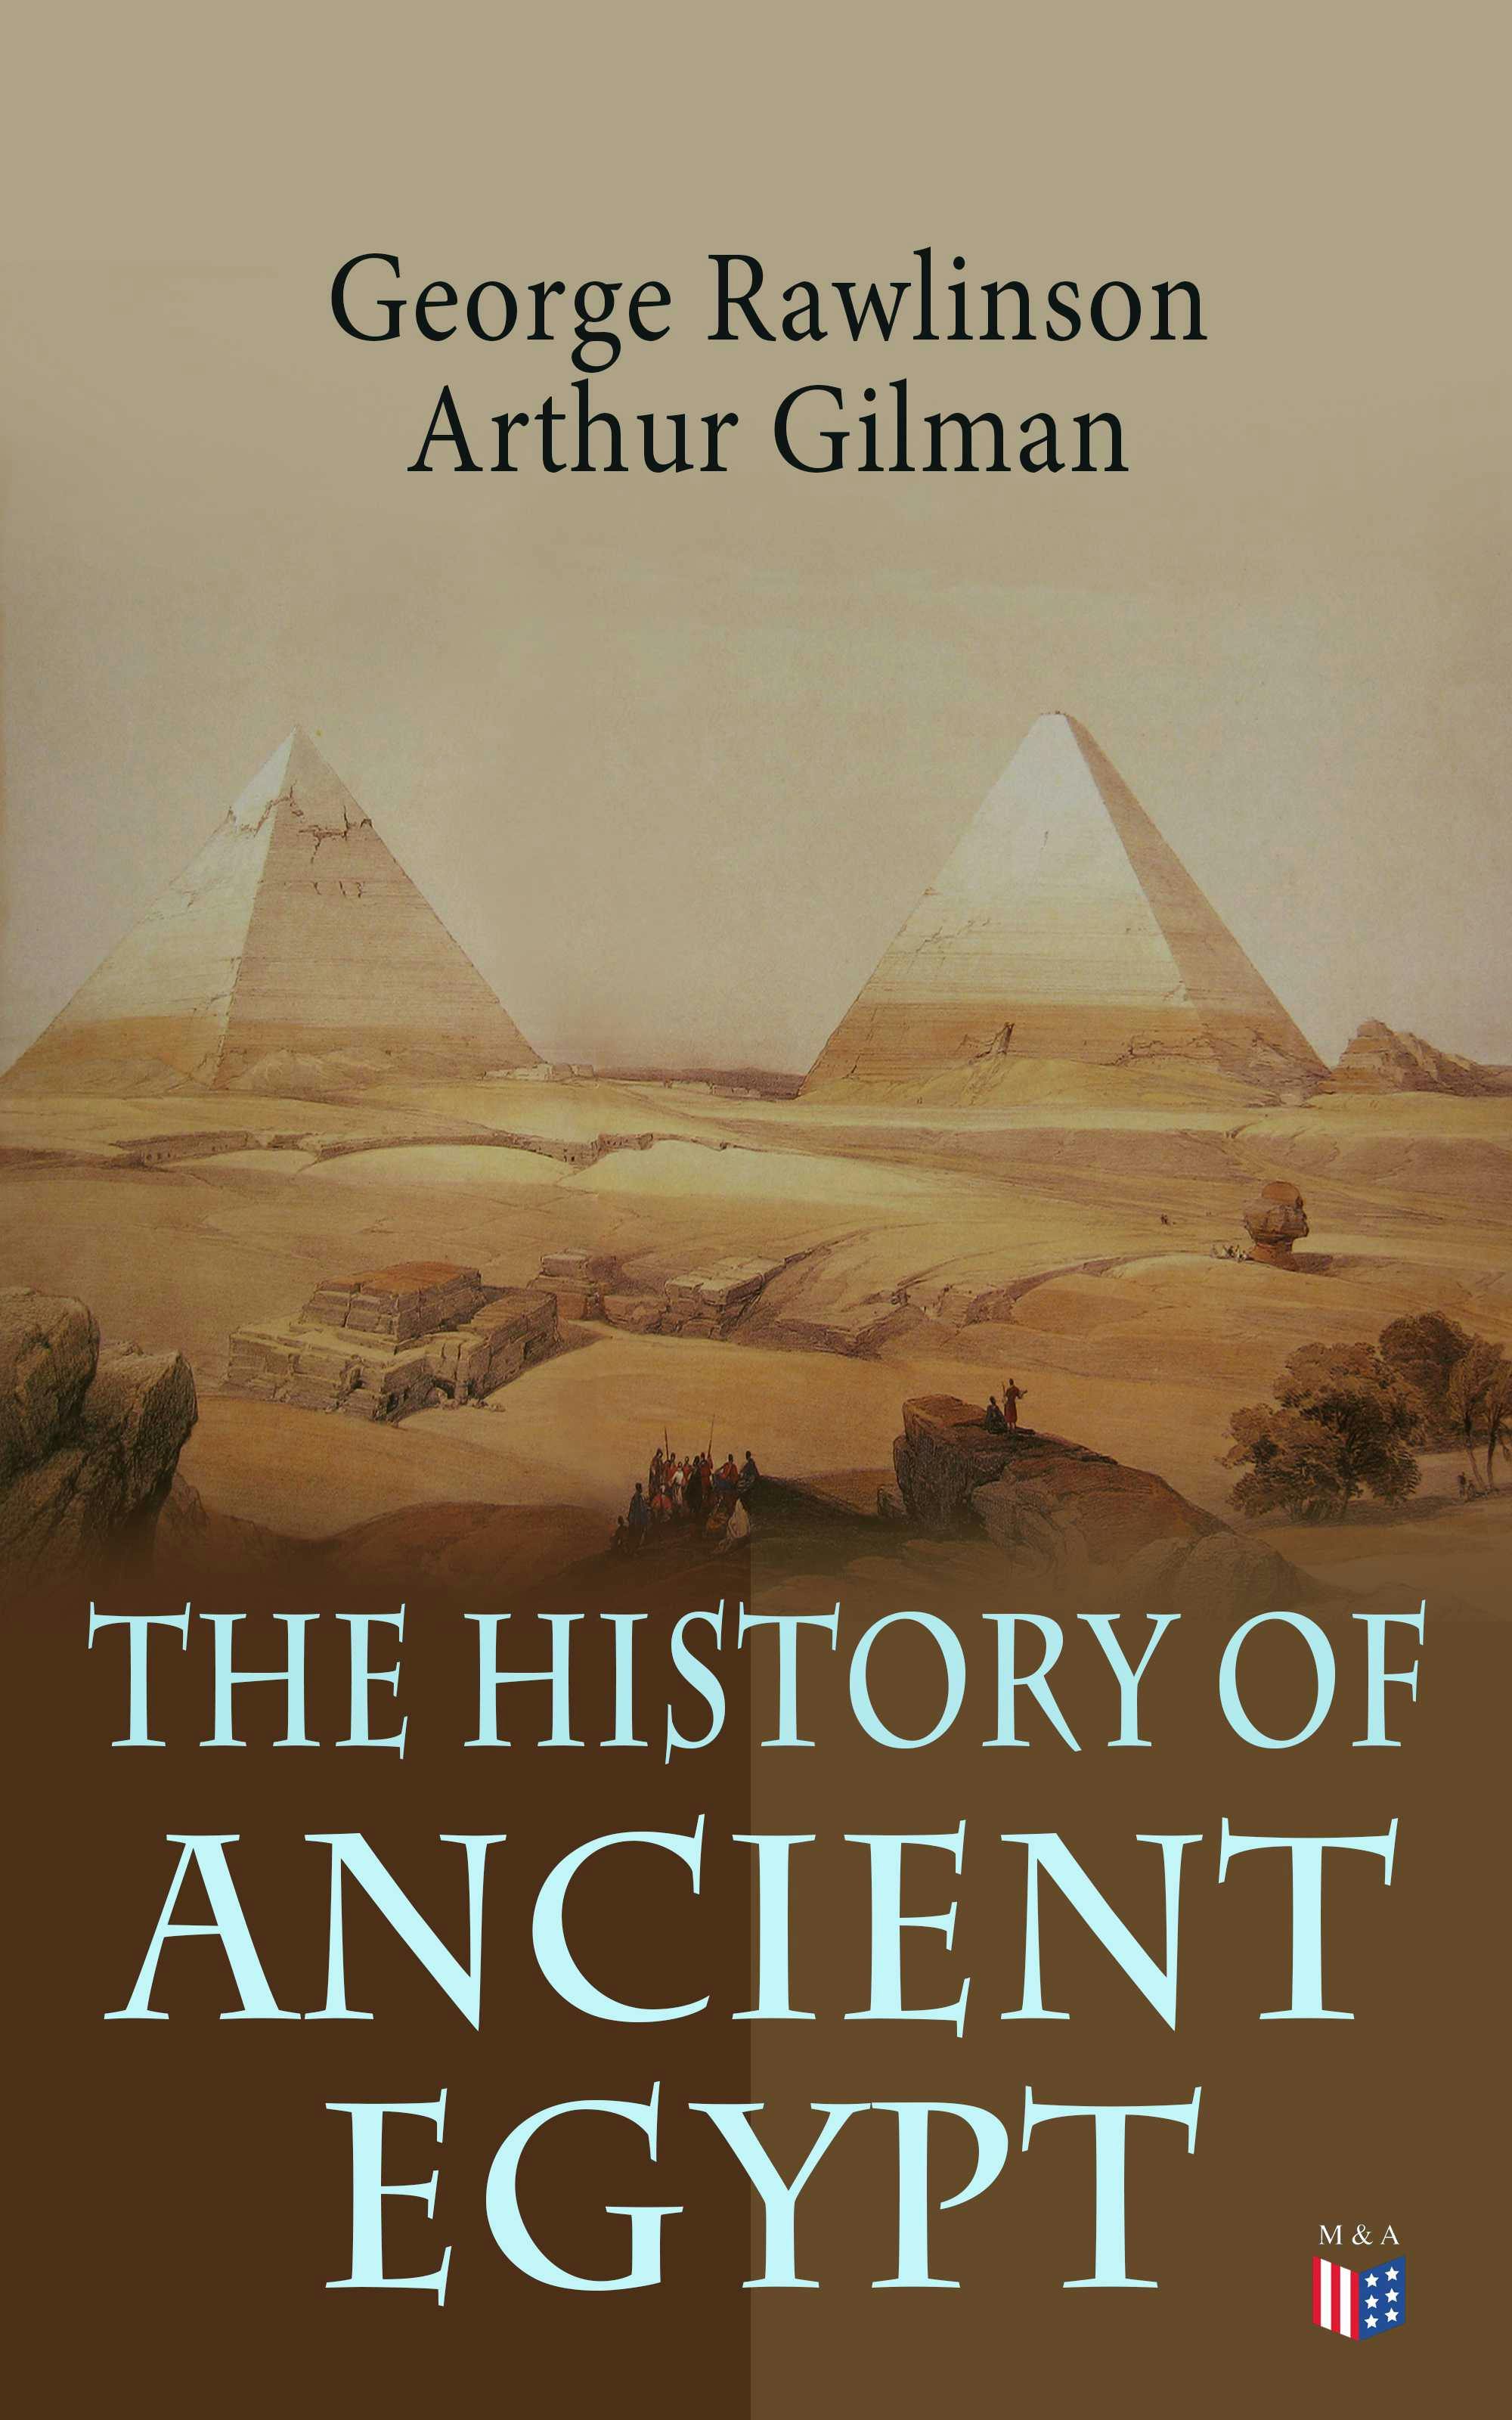 The History of Ancient Egypt: The Land & The People of Egypt, Egyptian Mythology & Customs, The Pyramid Builders, The Rise of Thebes, The Reign of the Great Pharaohs, The Priest-Kings, The Ethiopians & Persian Conquest - undefined